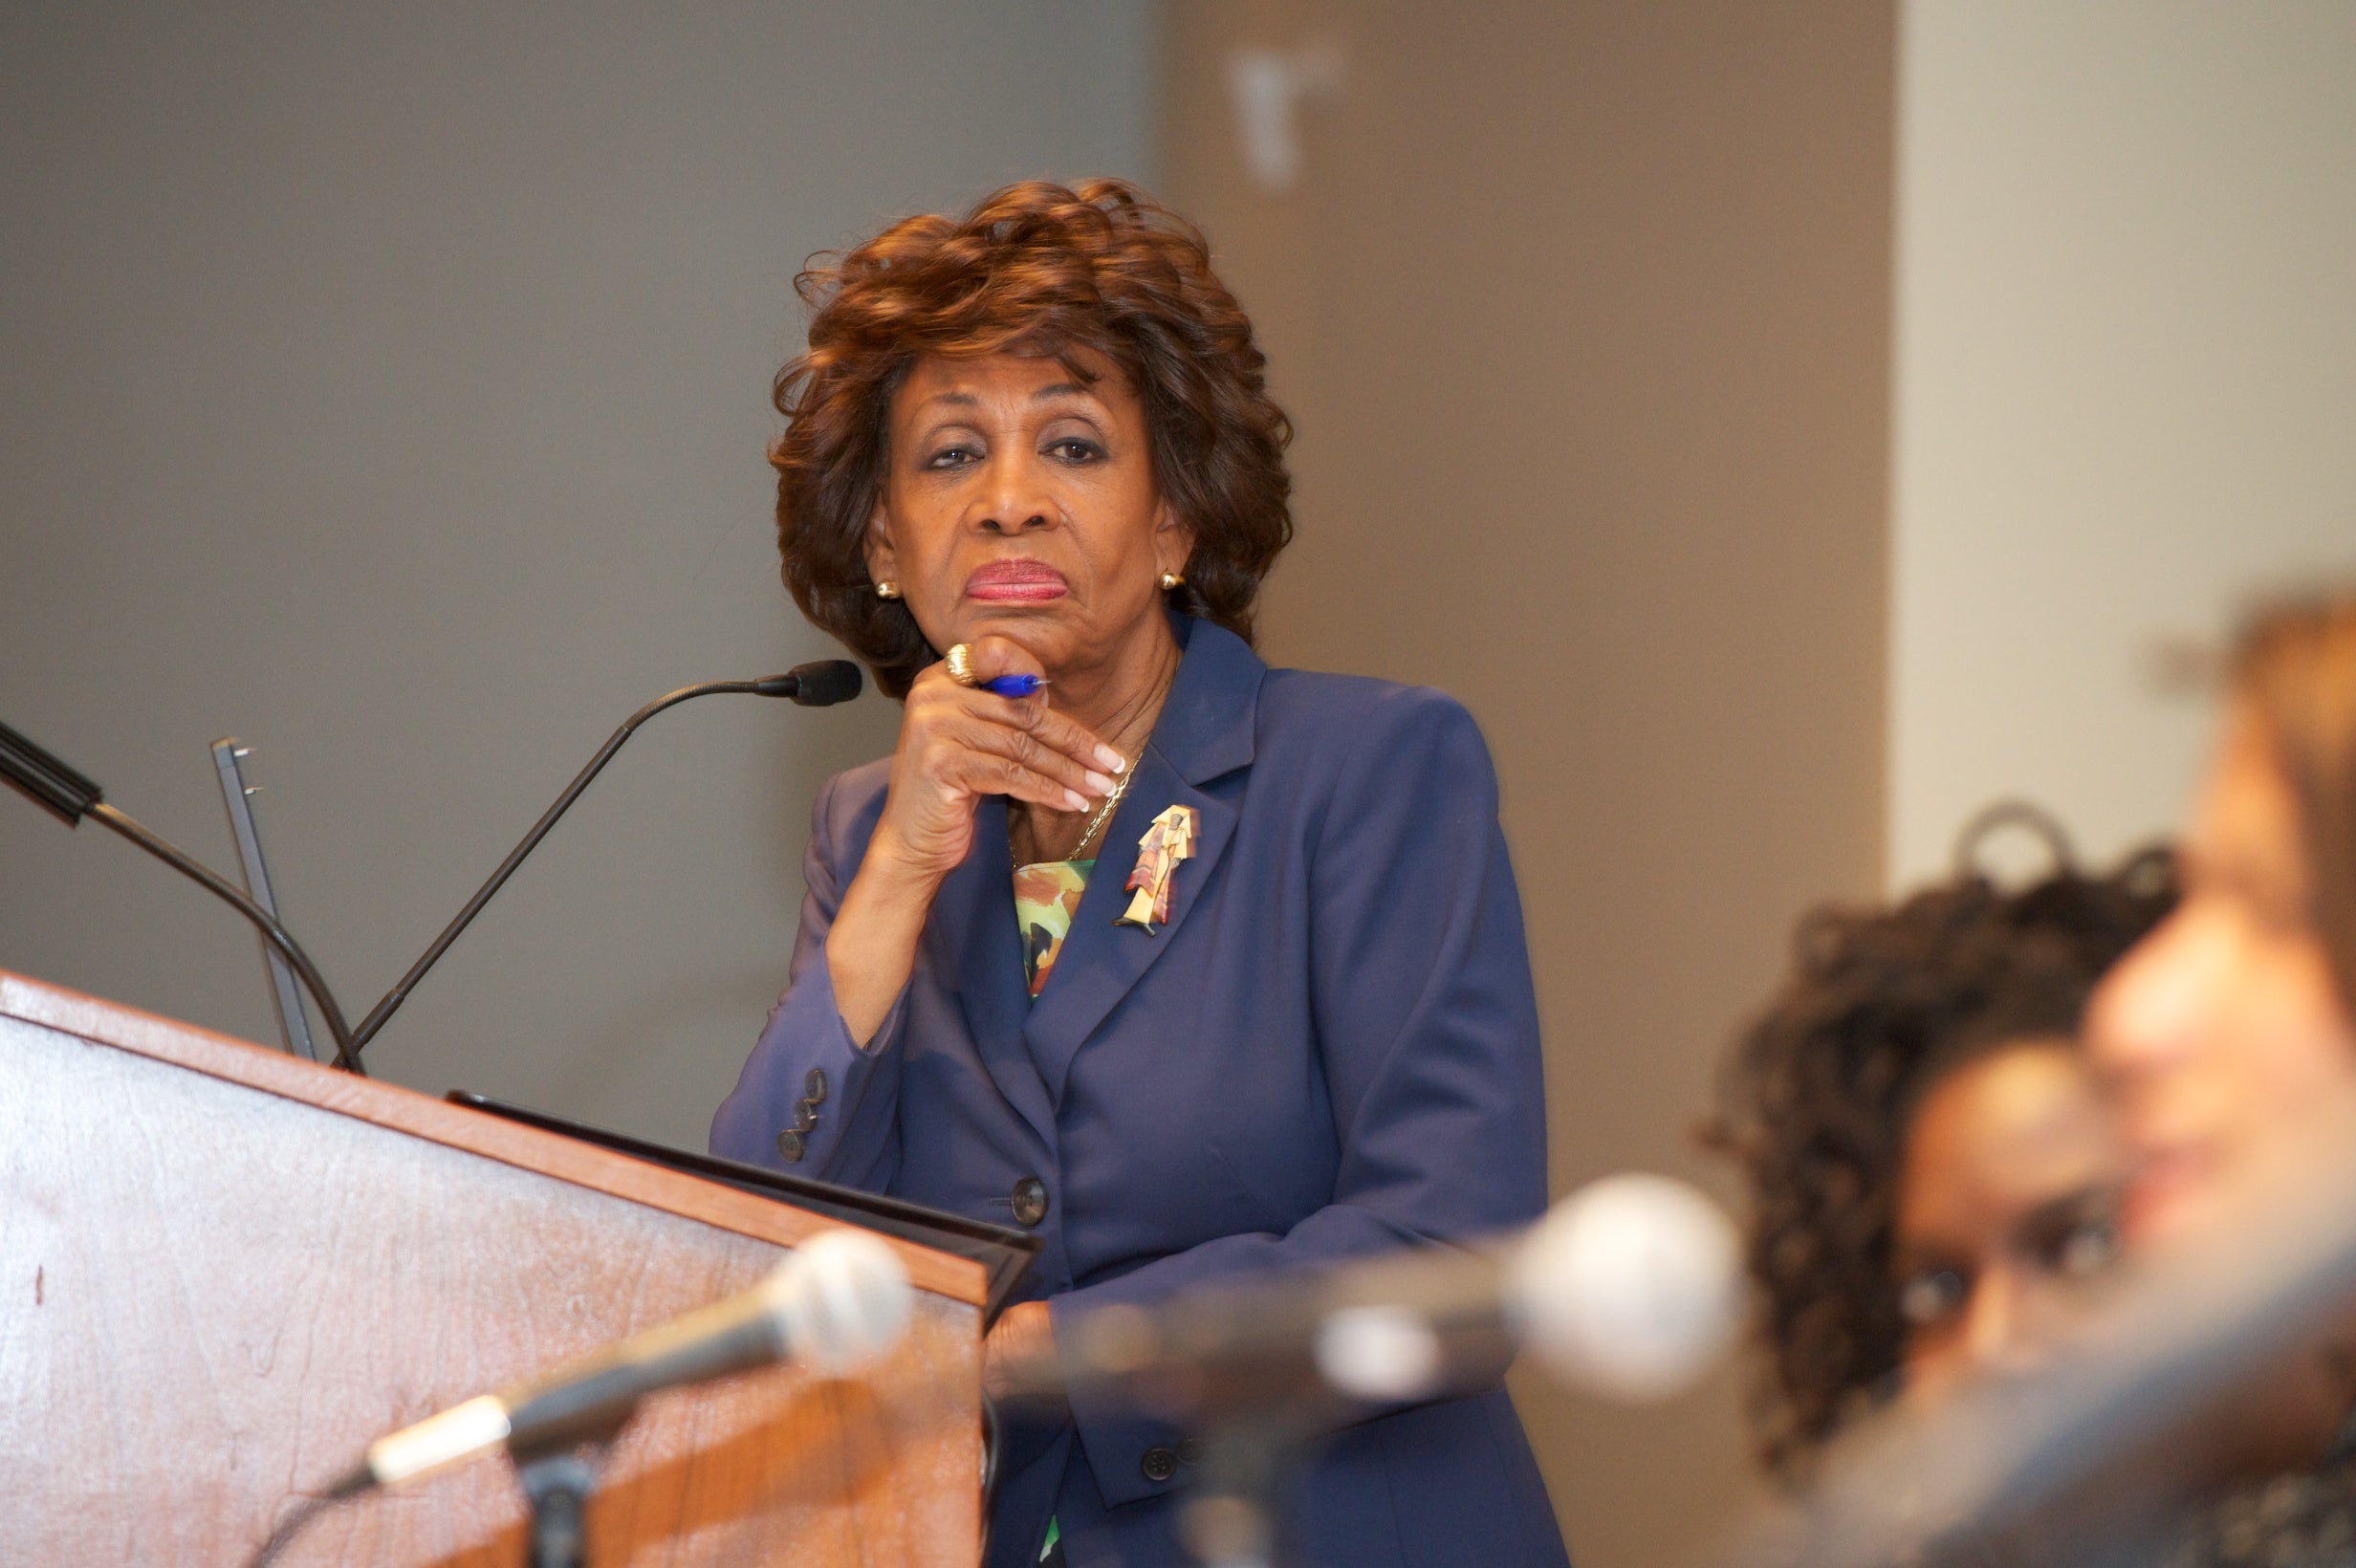 So About That Time A Reporter Claimed Maxine Waters 'Shoved' Him